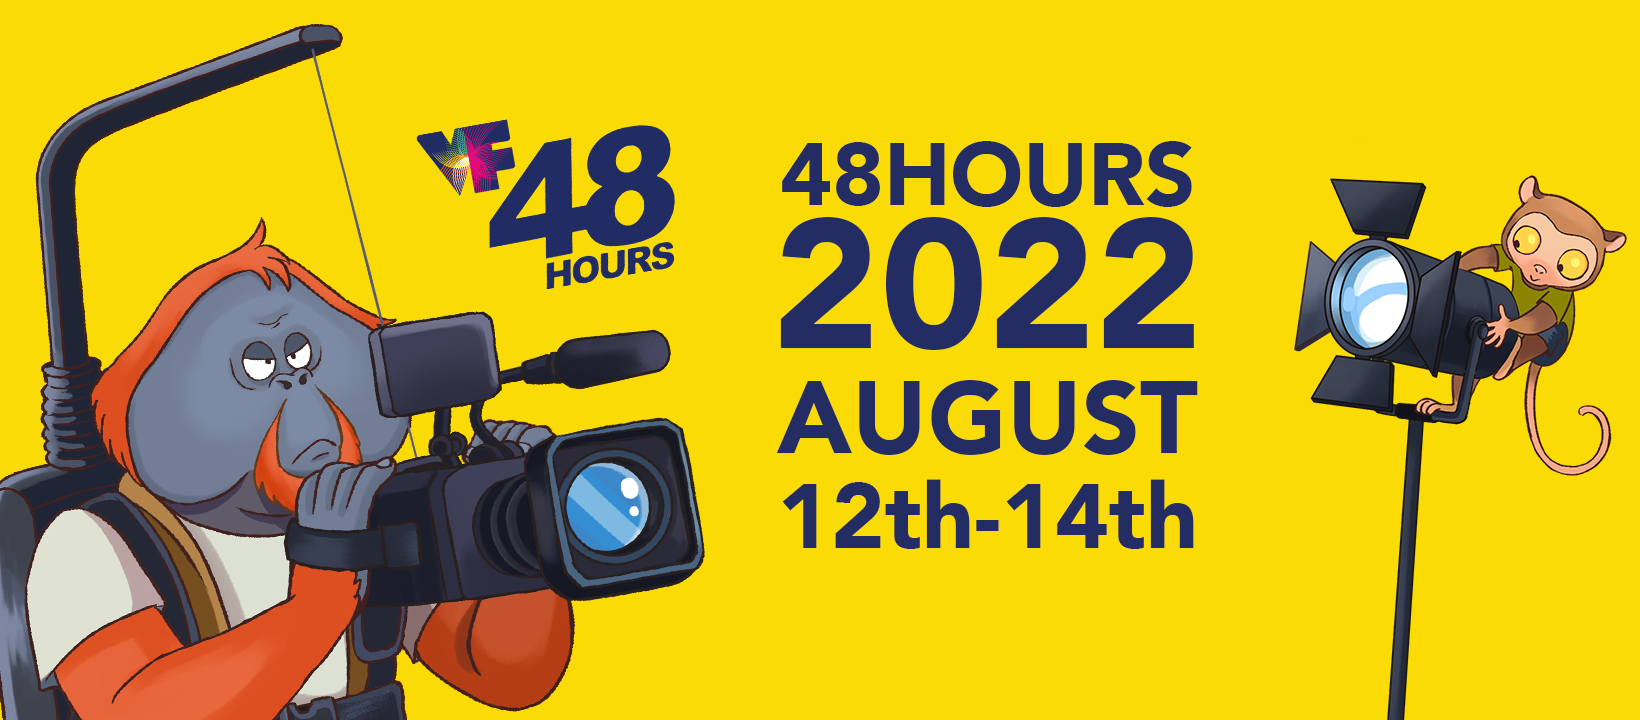 12th-14th August: Join our 48Hours team!